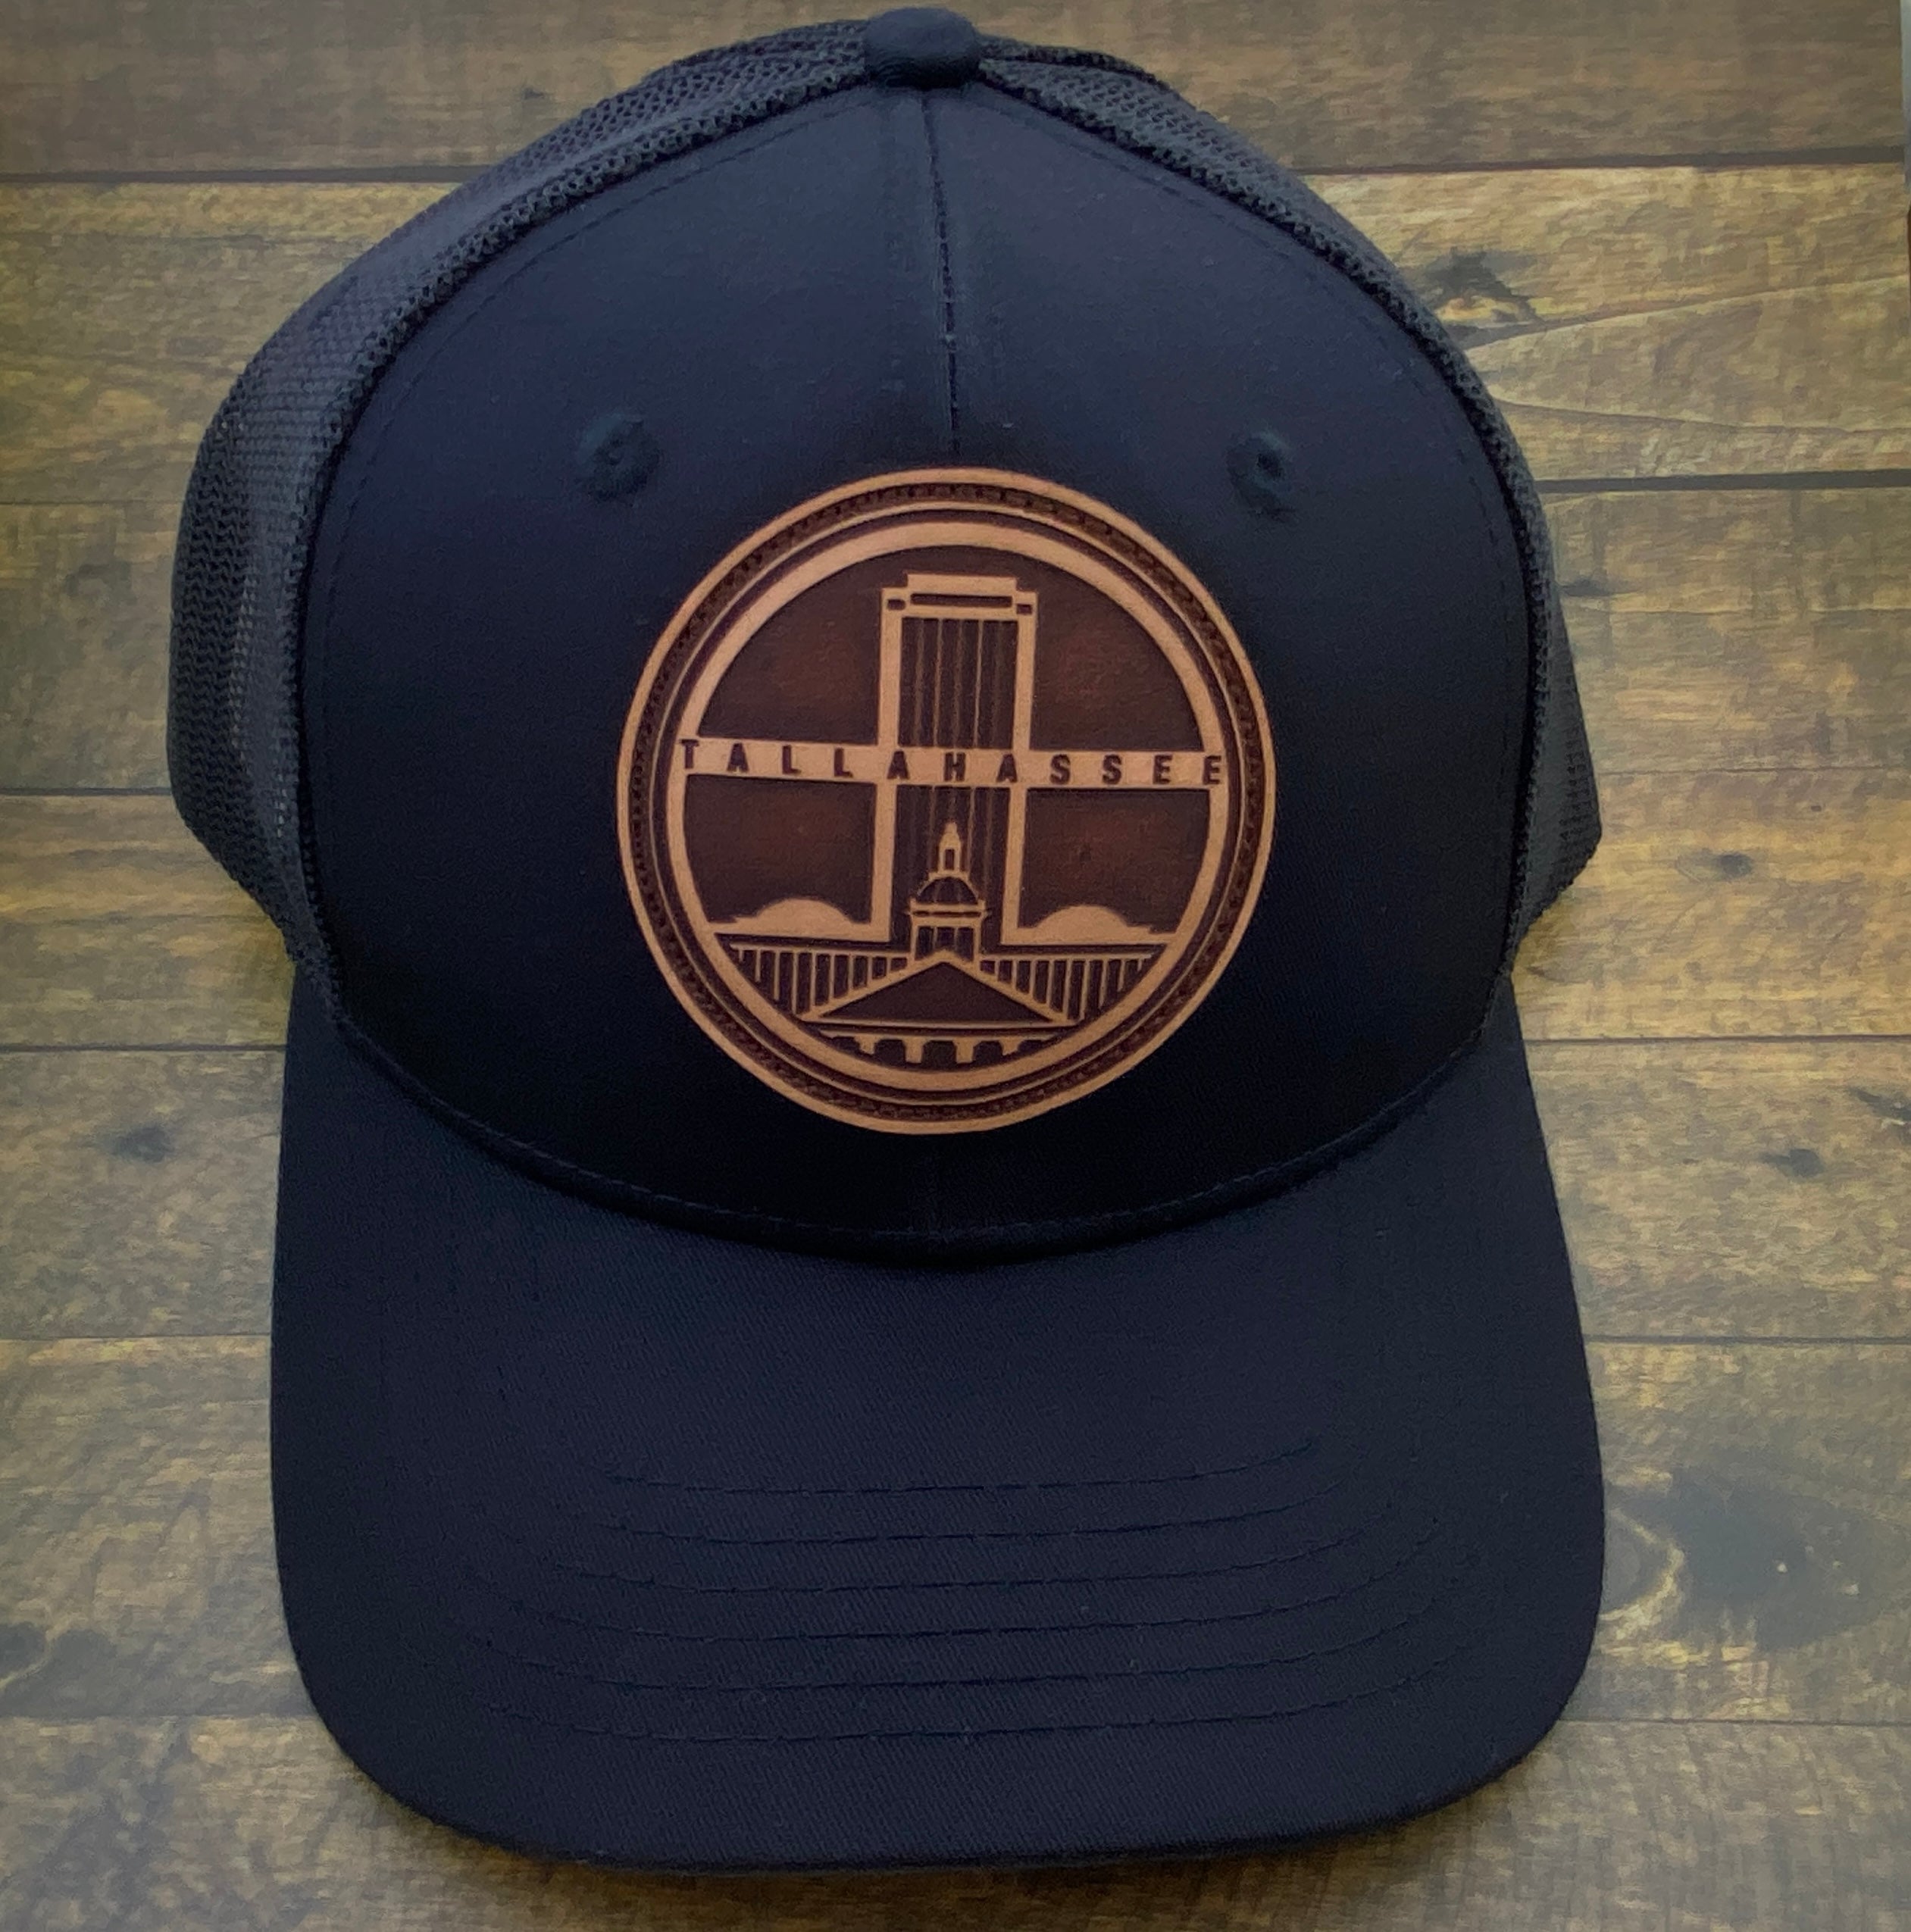 Hats: Tallahassee: Leather patch – Pieces of Art: The Tallahassee